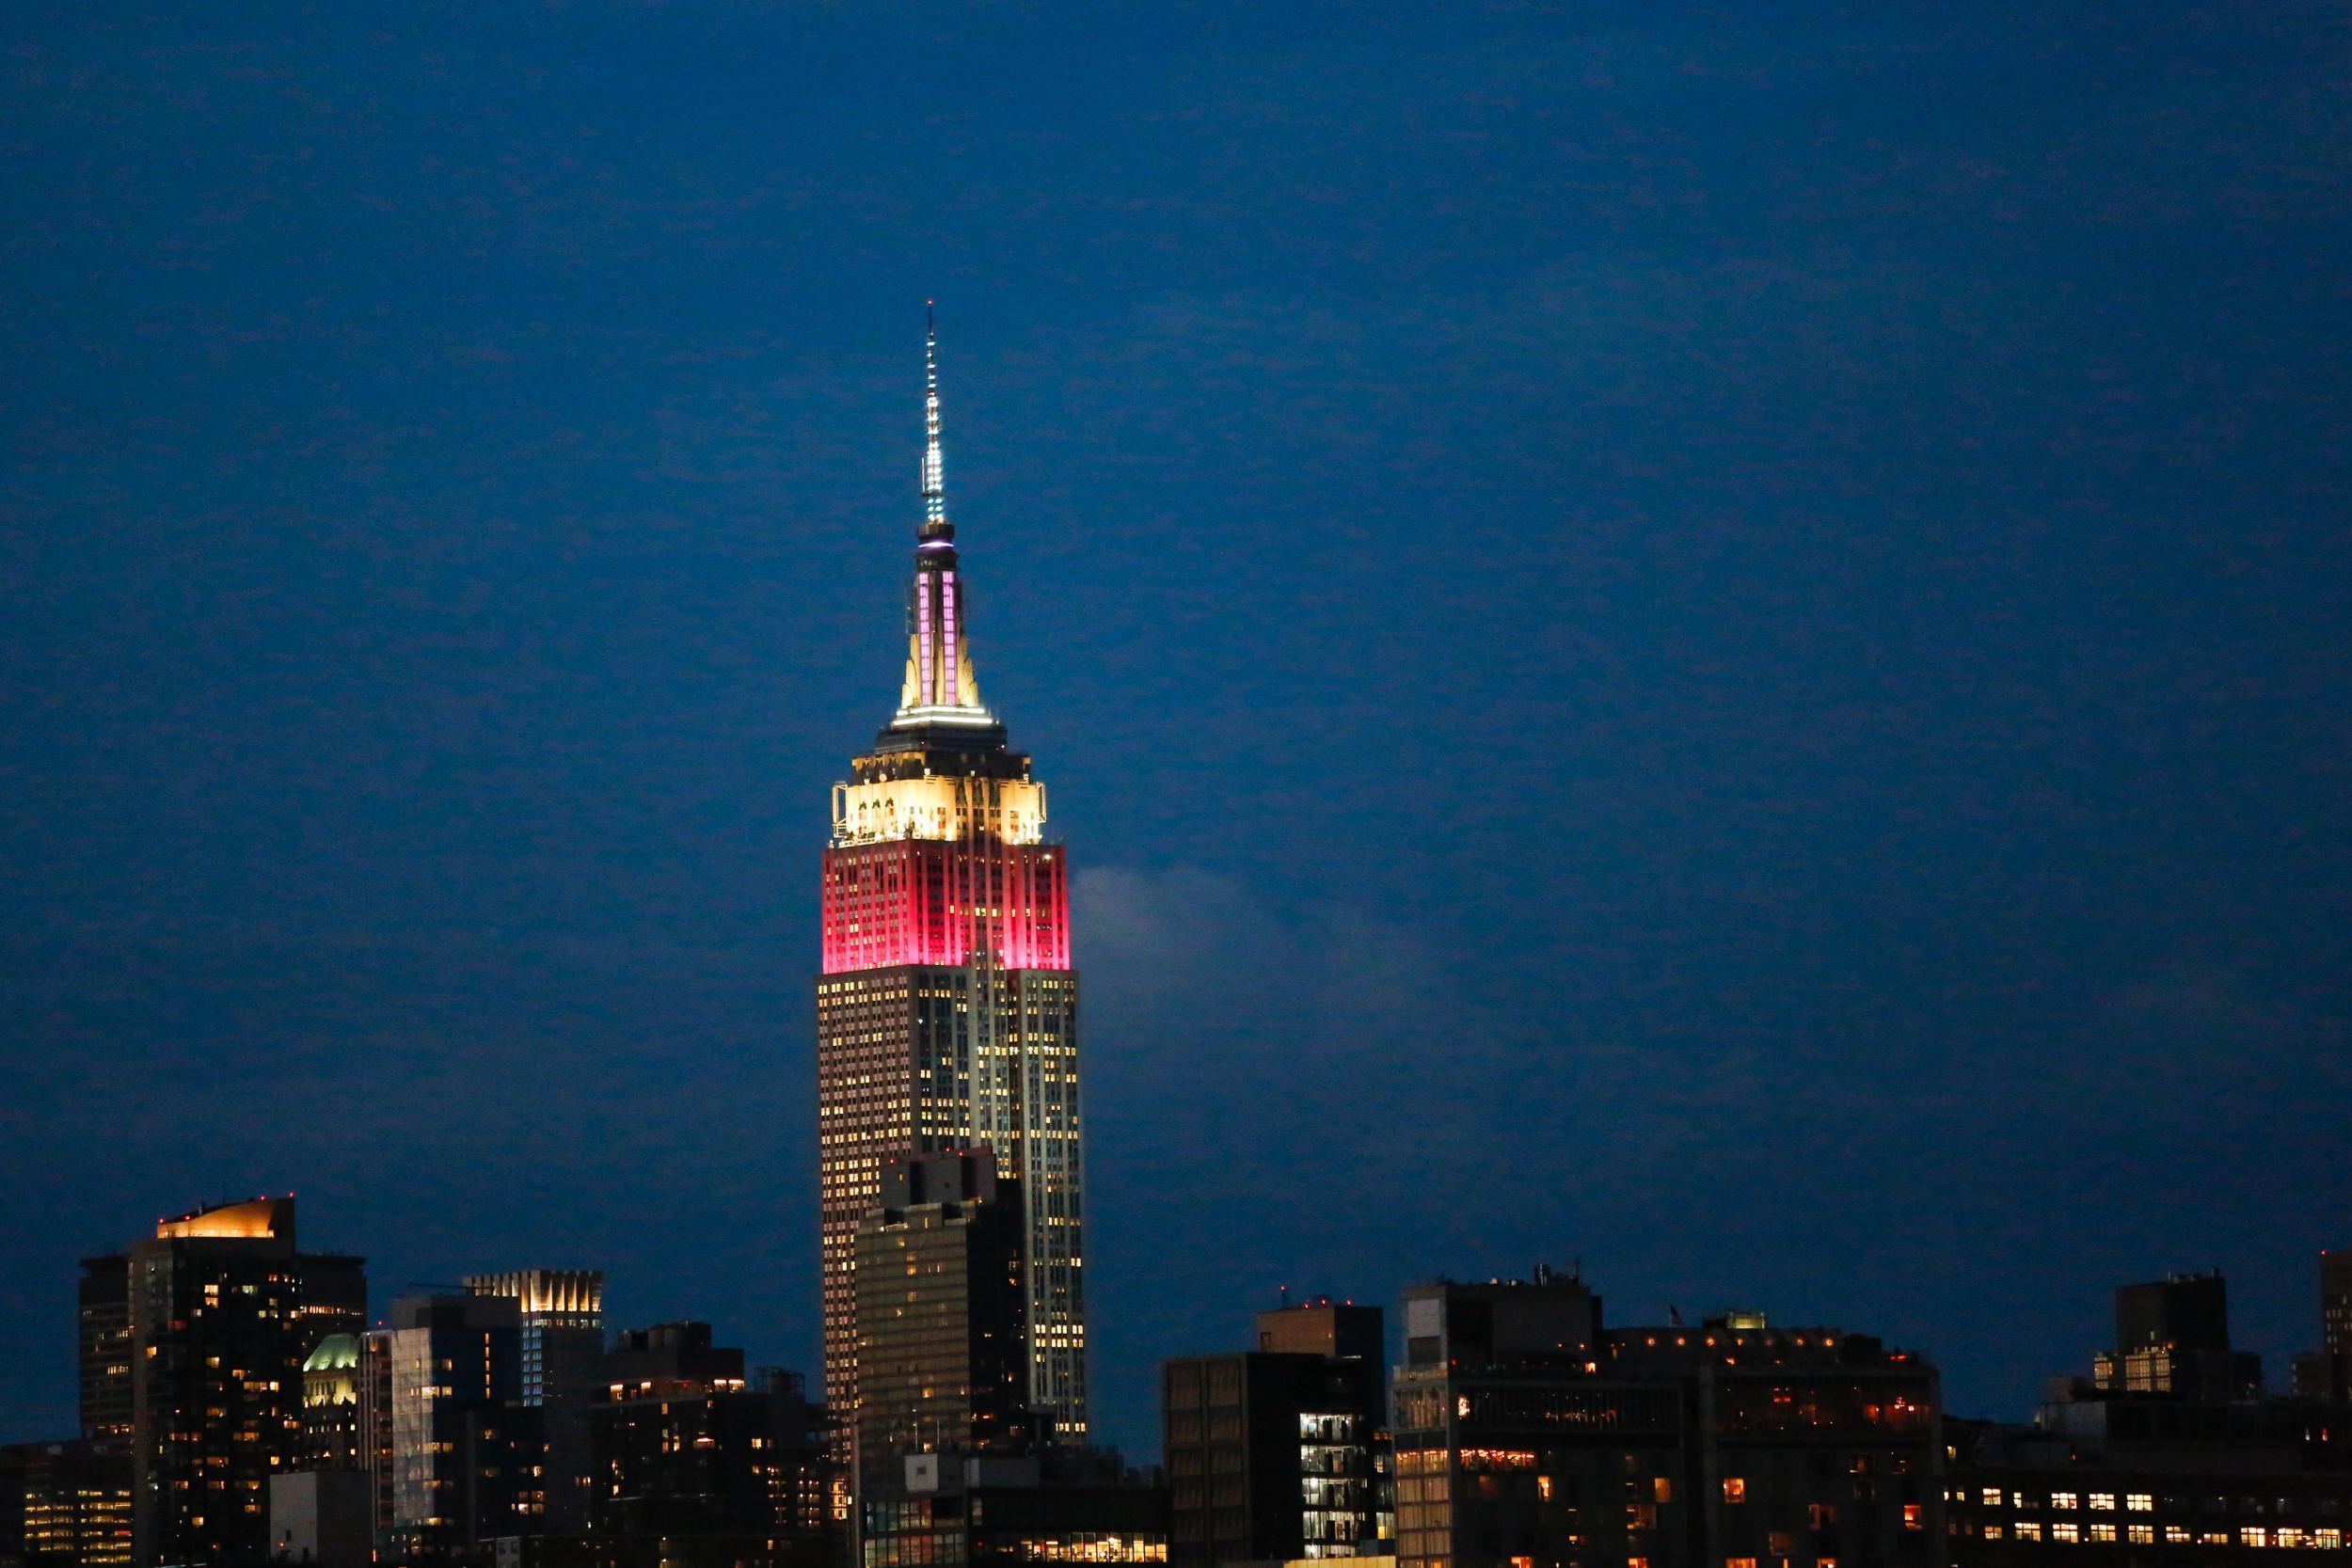 New York's Empire State Building was lit up in Qatar's national colours white and burgundy to mark 10 years of Qatar Airways flights to the US on Tuesday 27 June